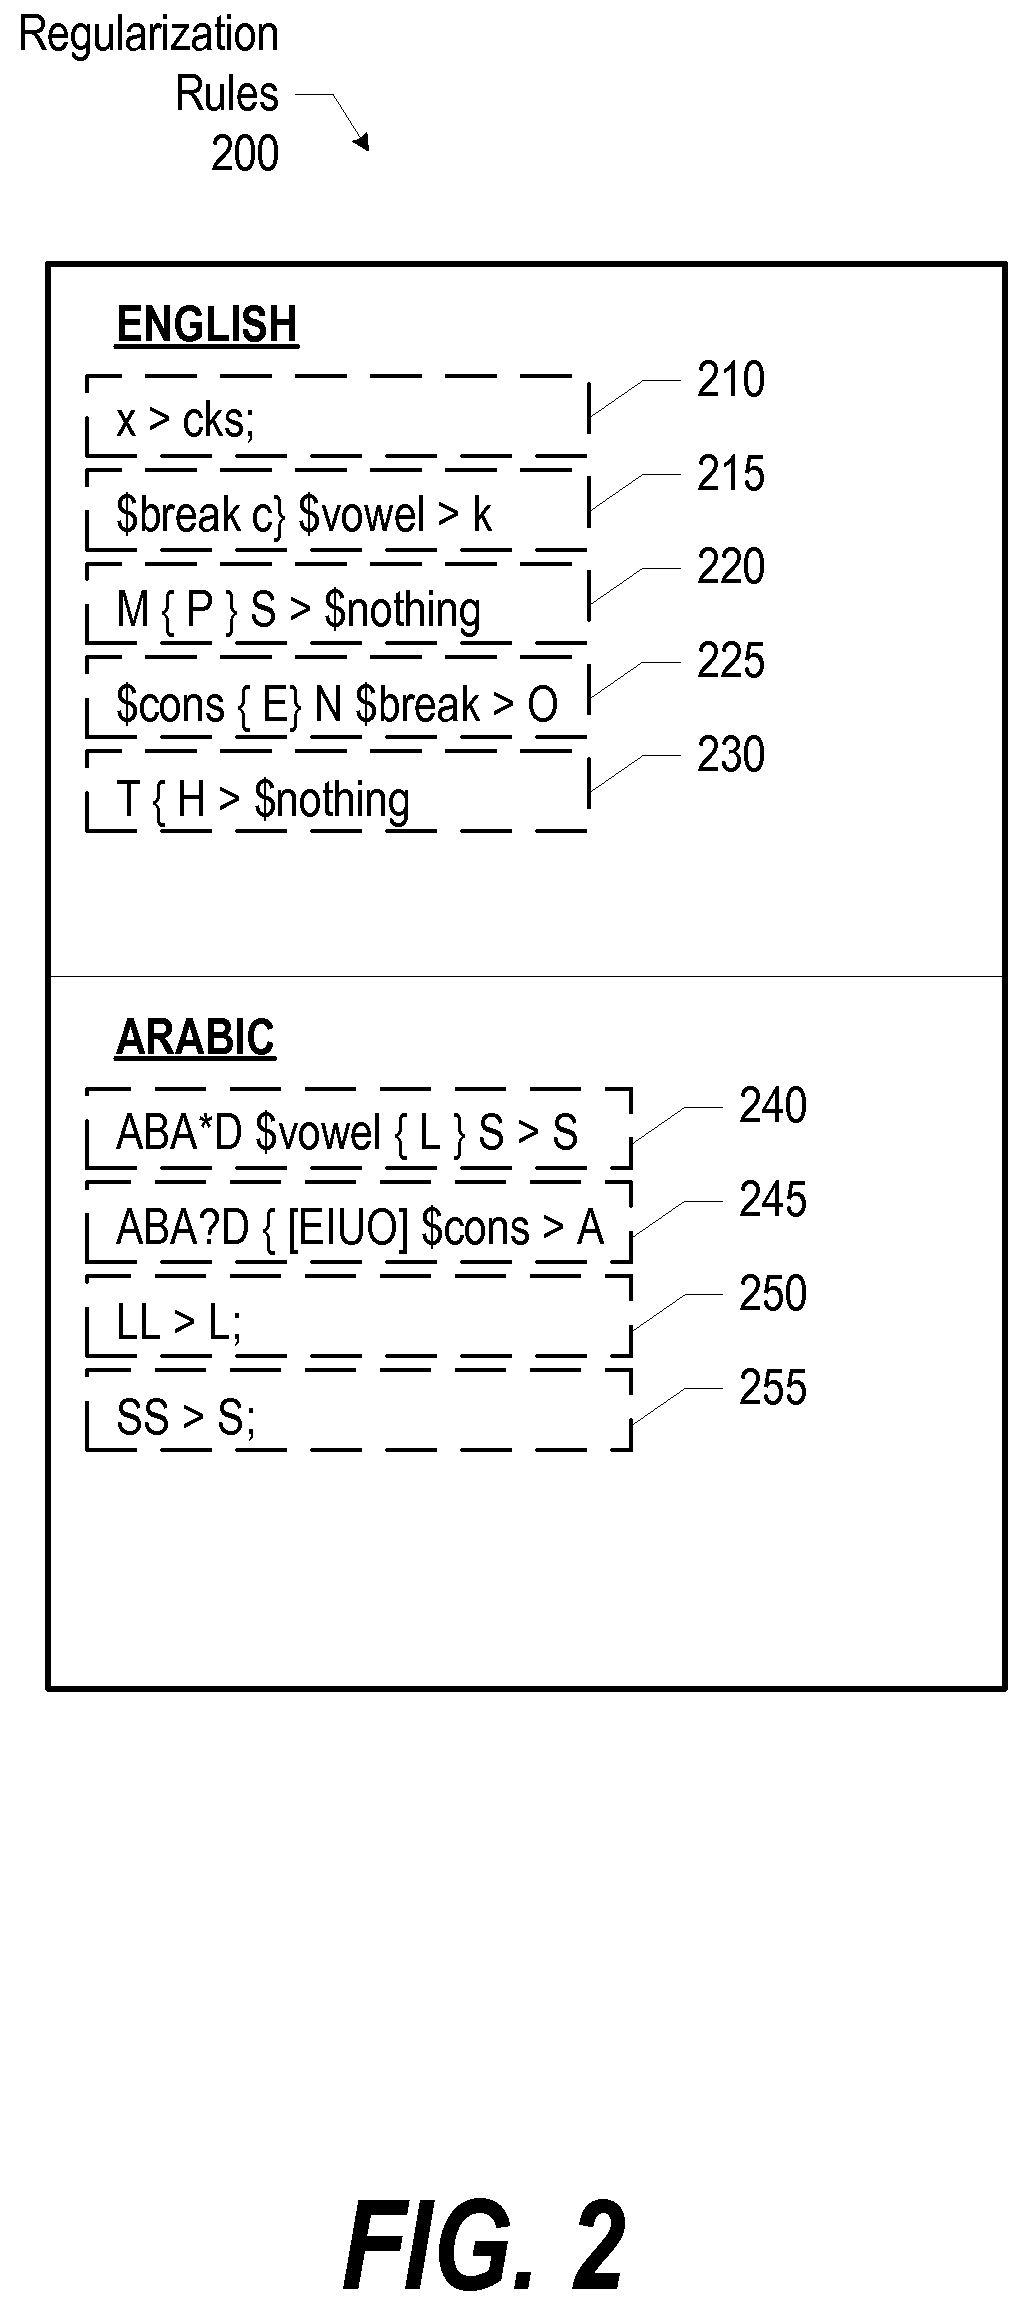 System and method for improved name matching using regularized name forms